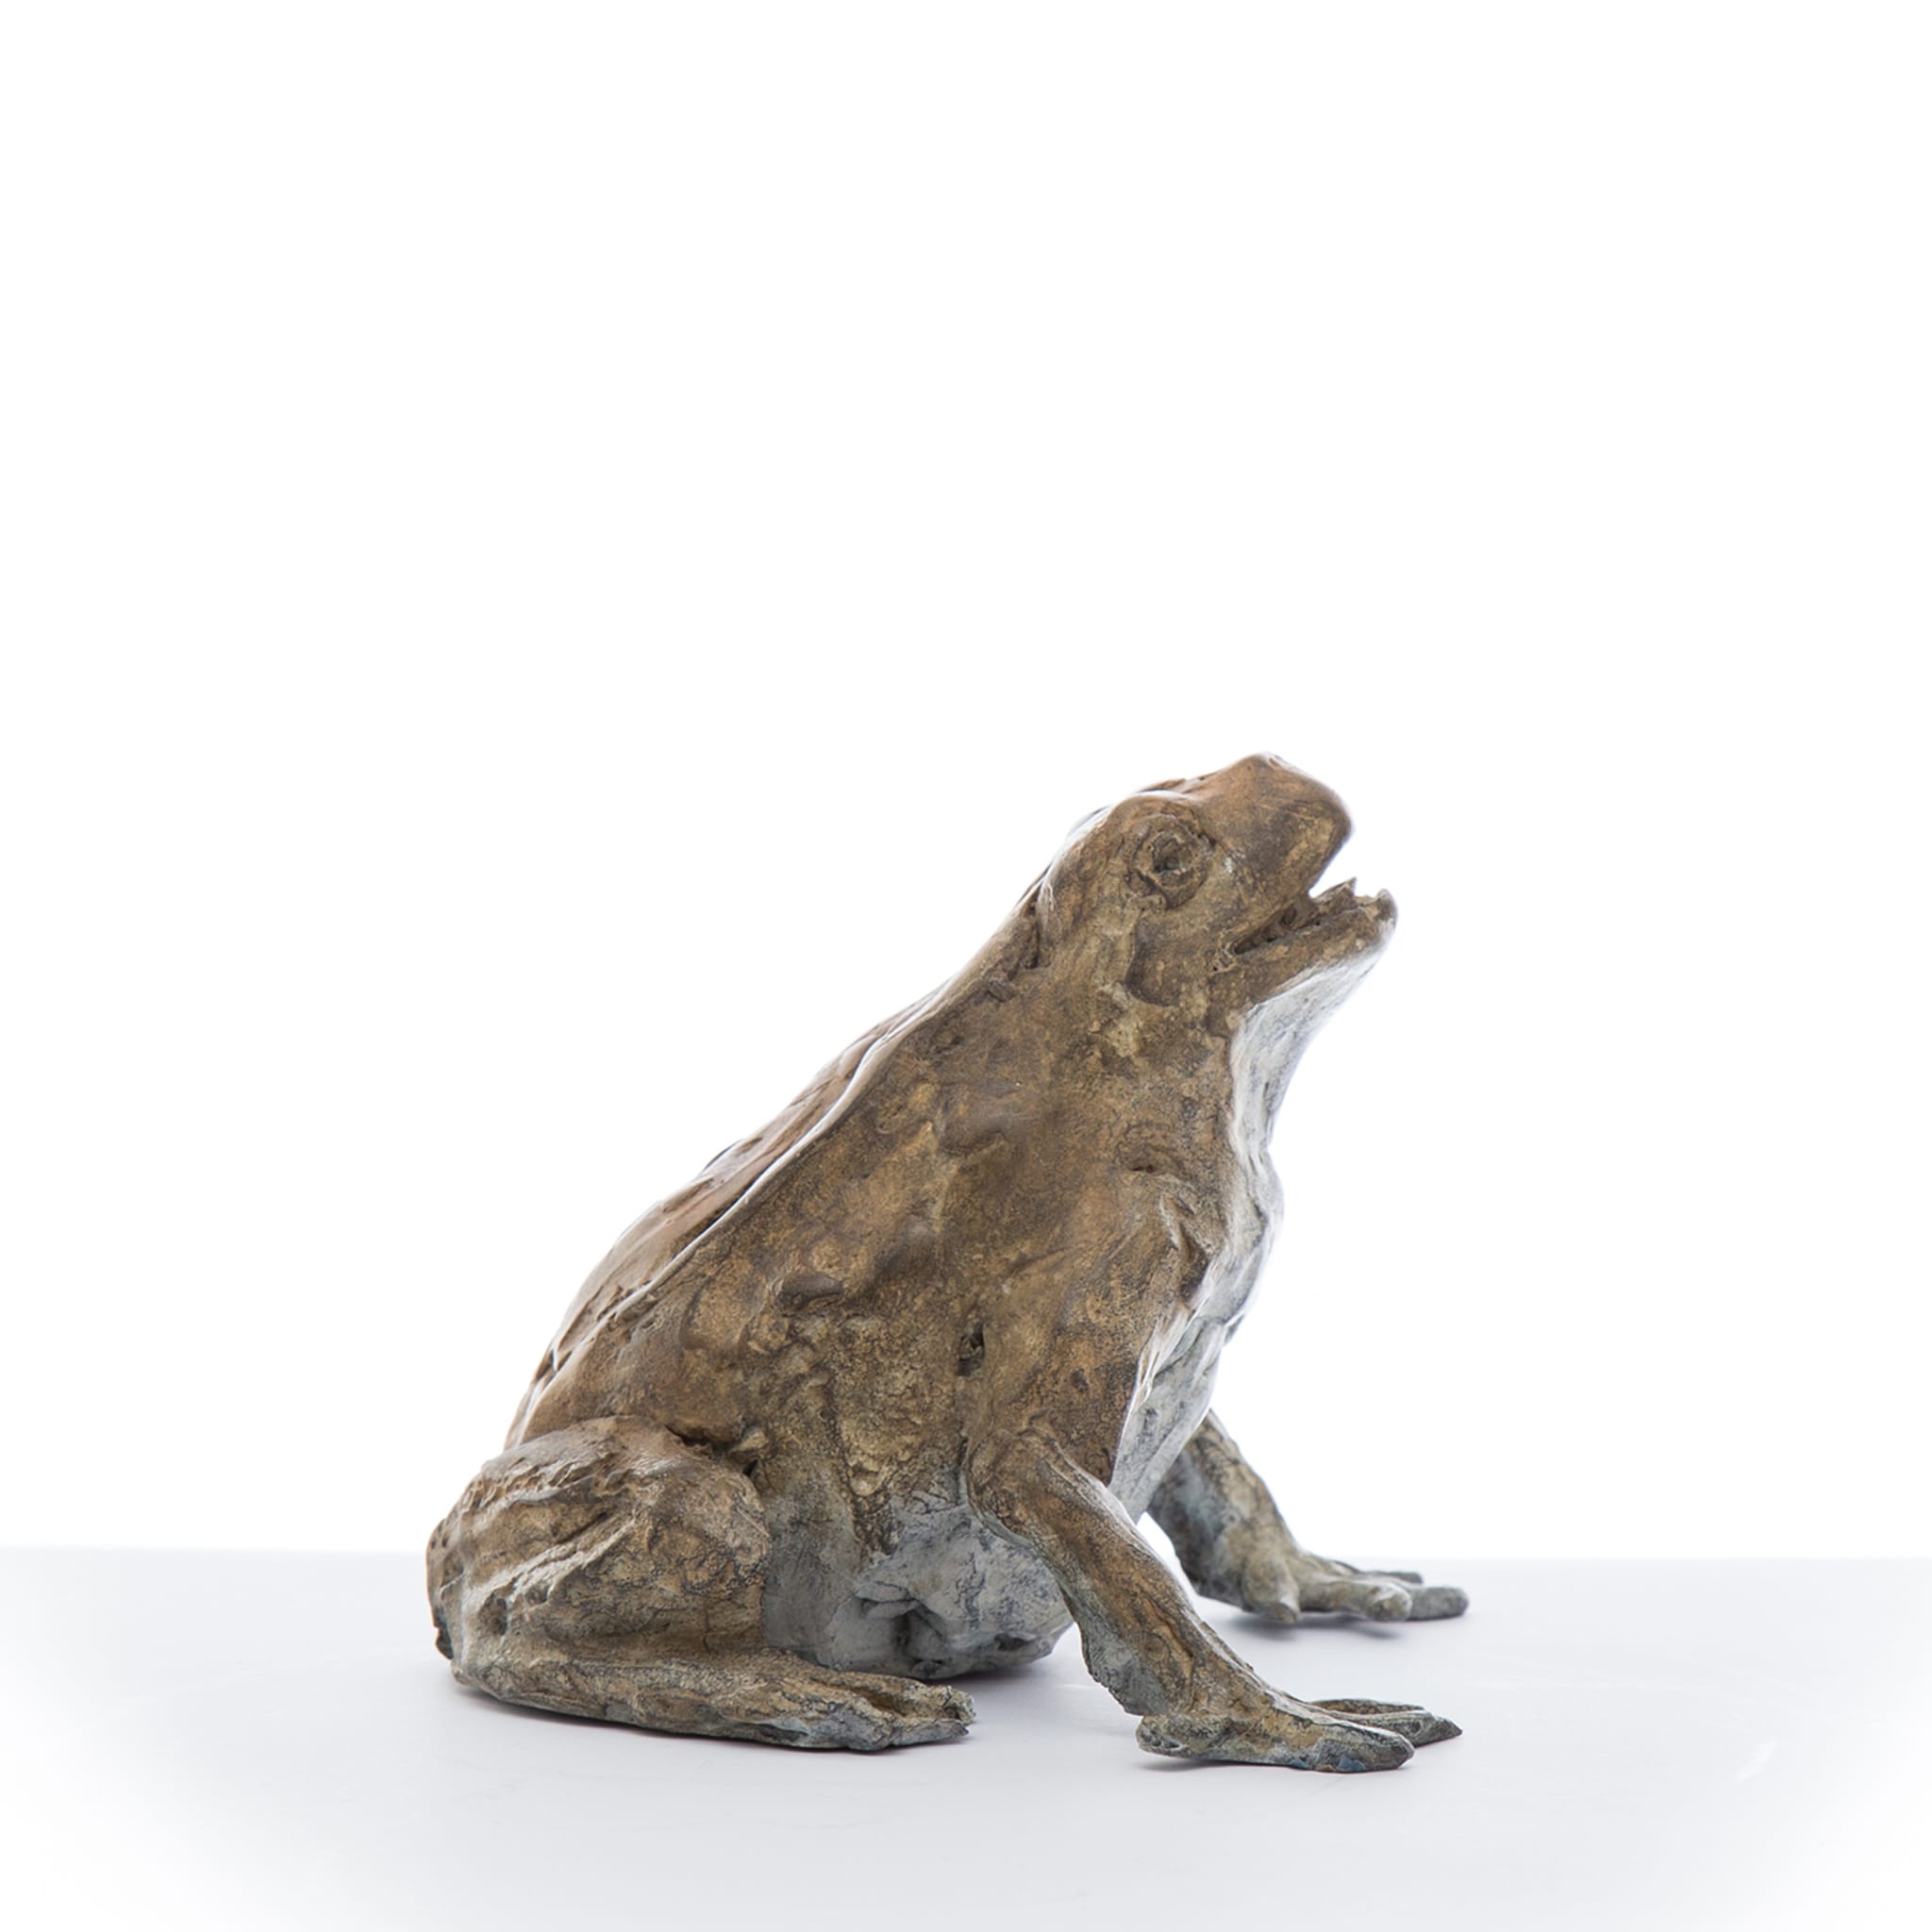 Small Frog Sculpture - Alternative view 4